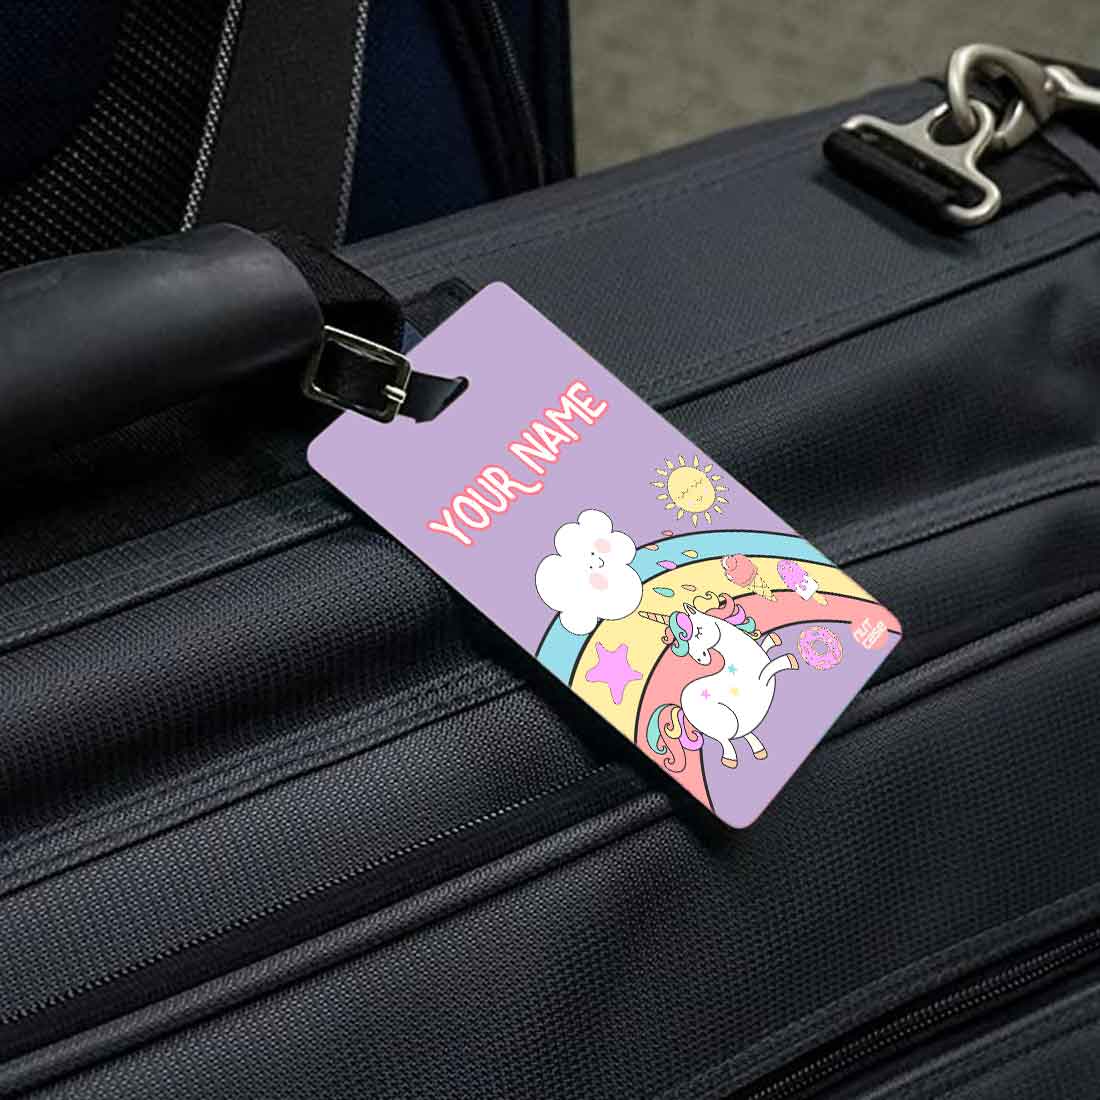 Kids Personalized Luggage Tags Add Your Name  - Unicorn